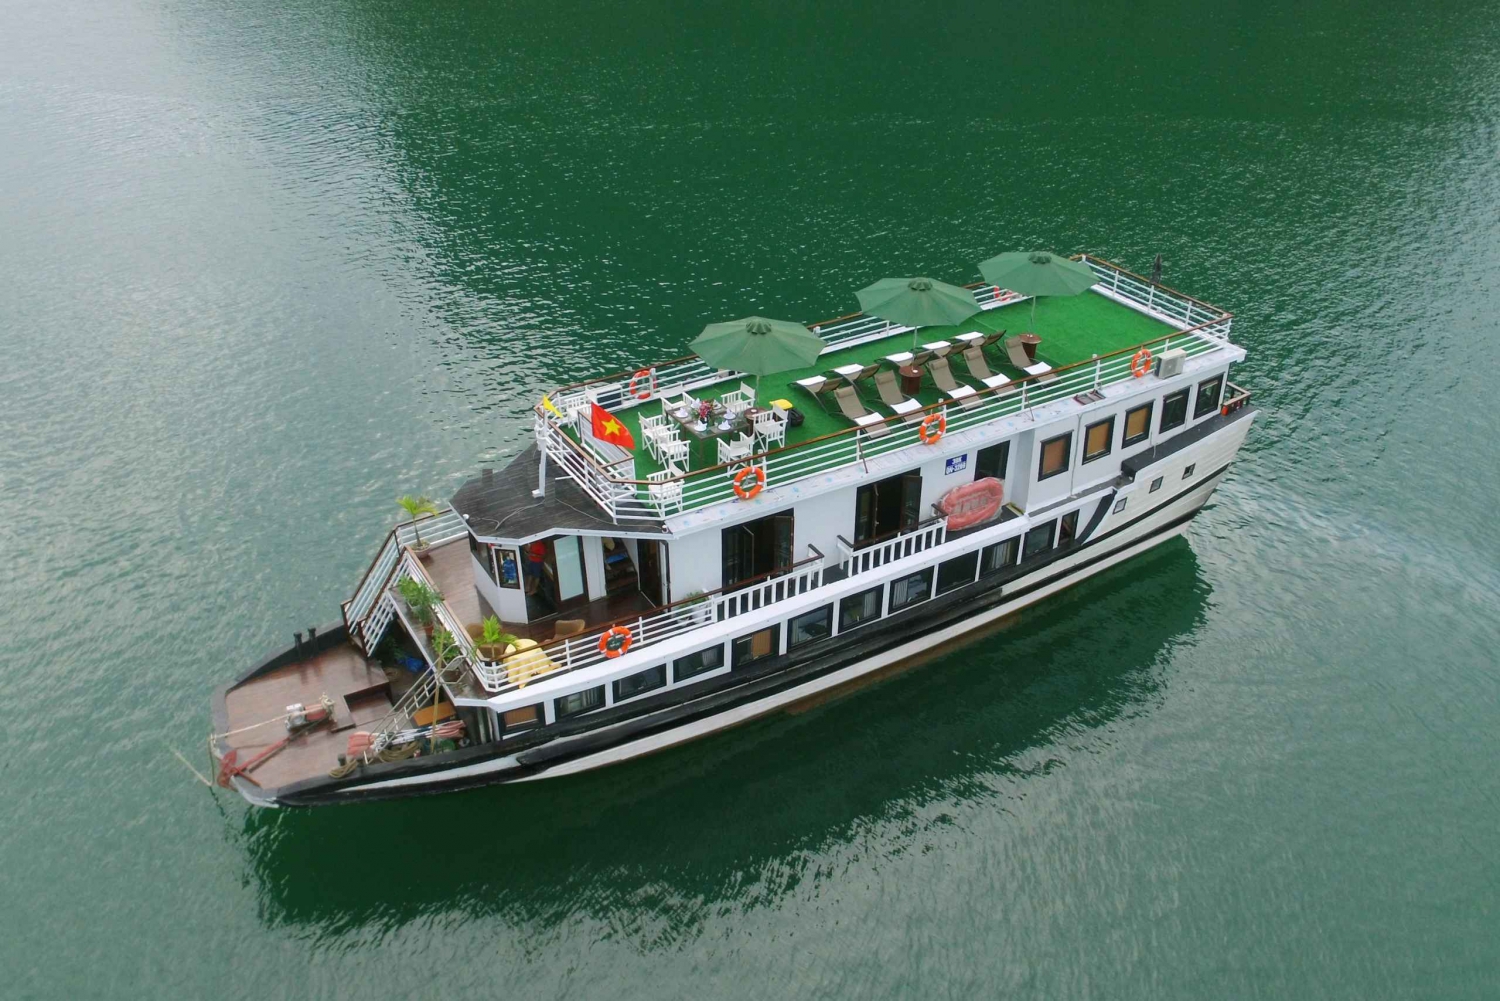 From Hanoi: 3-Day and 2-Night Cruise Stay at Bai Tu Long Bay